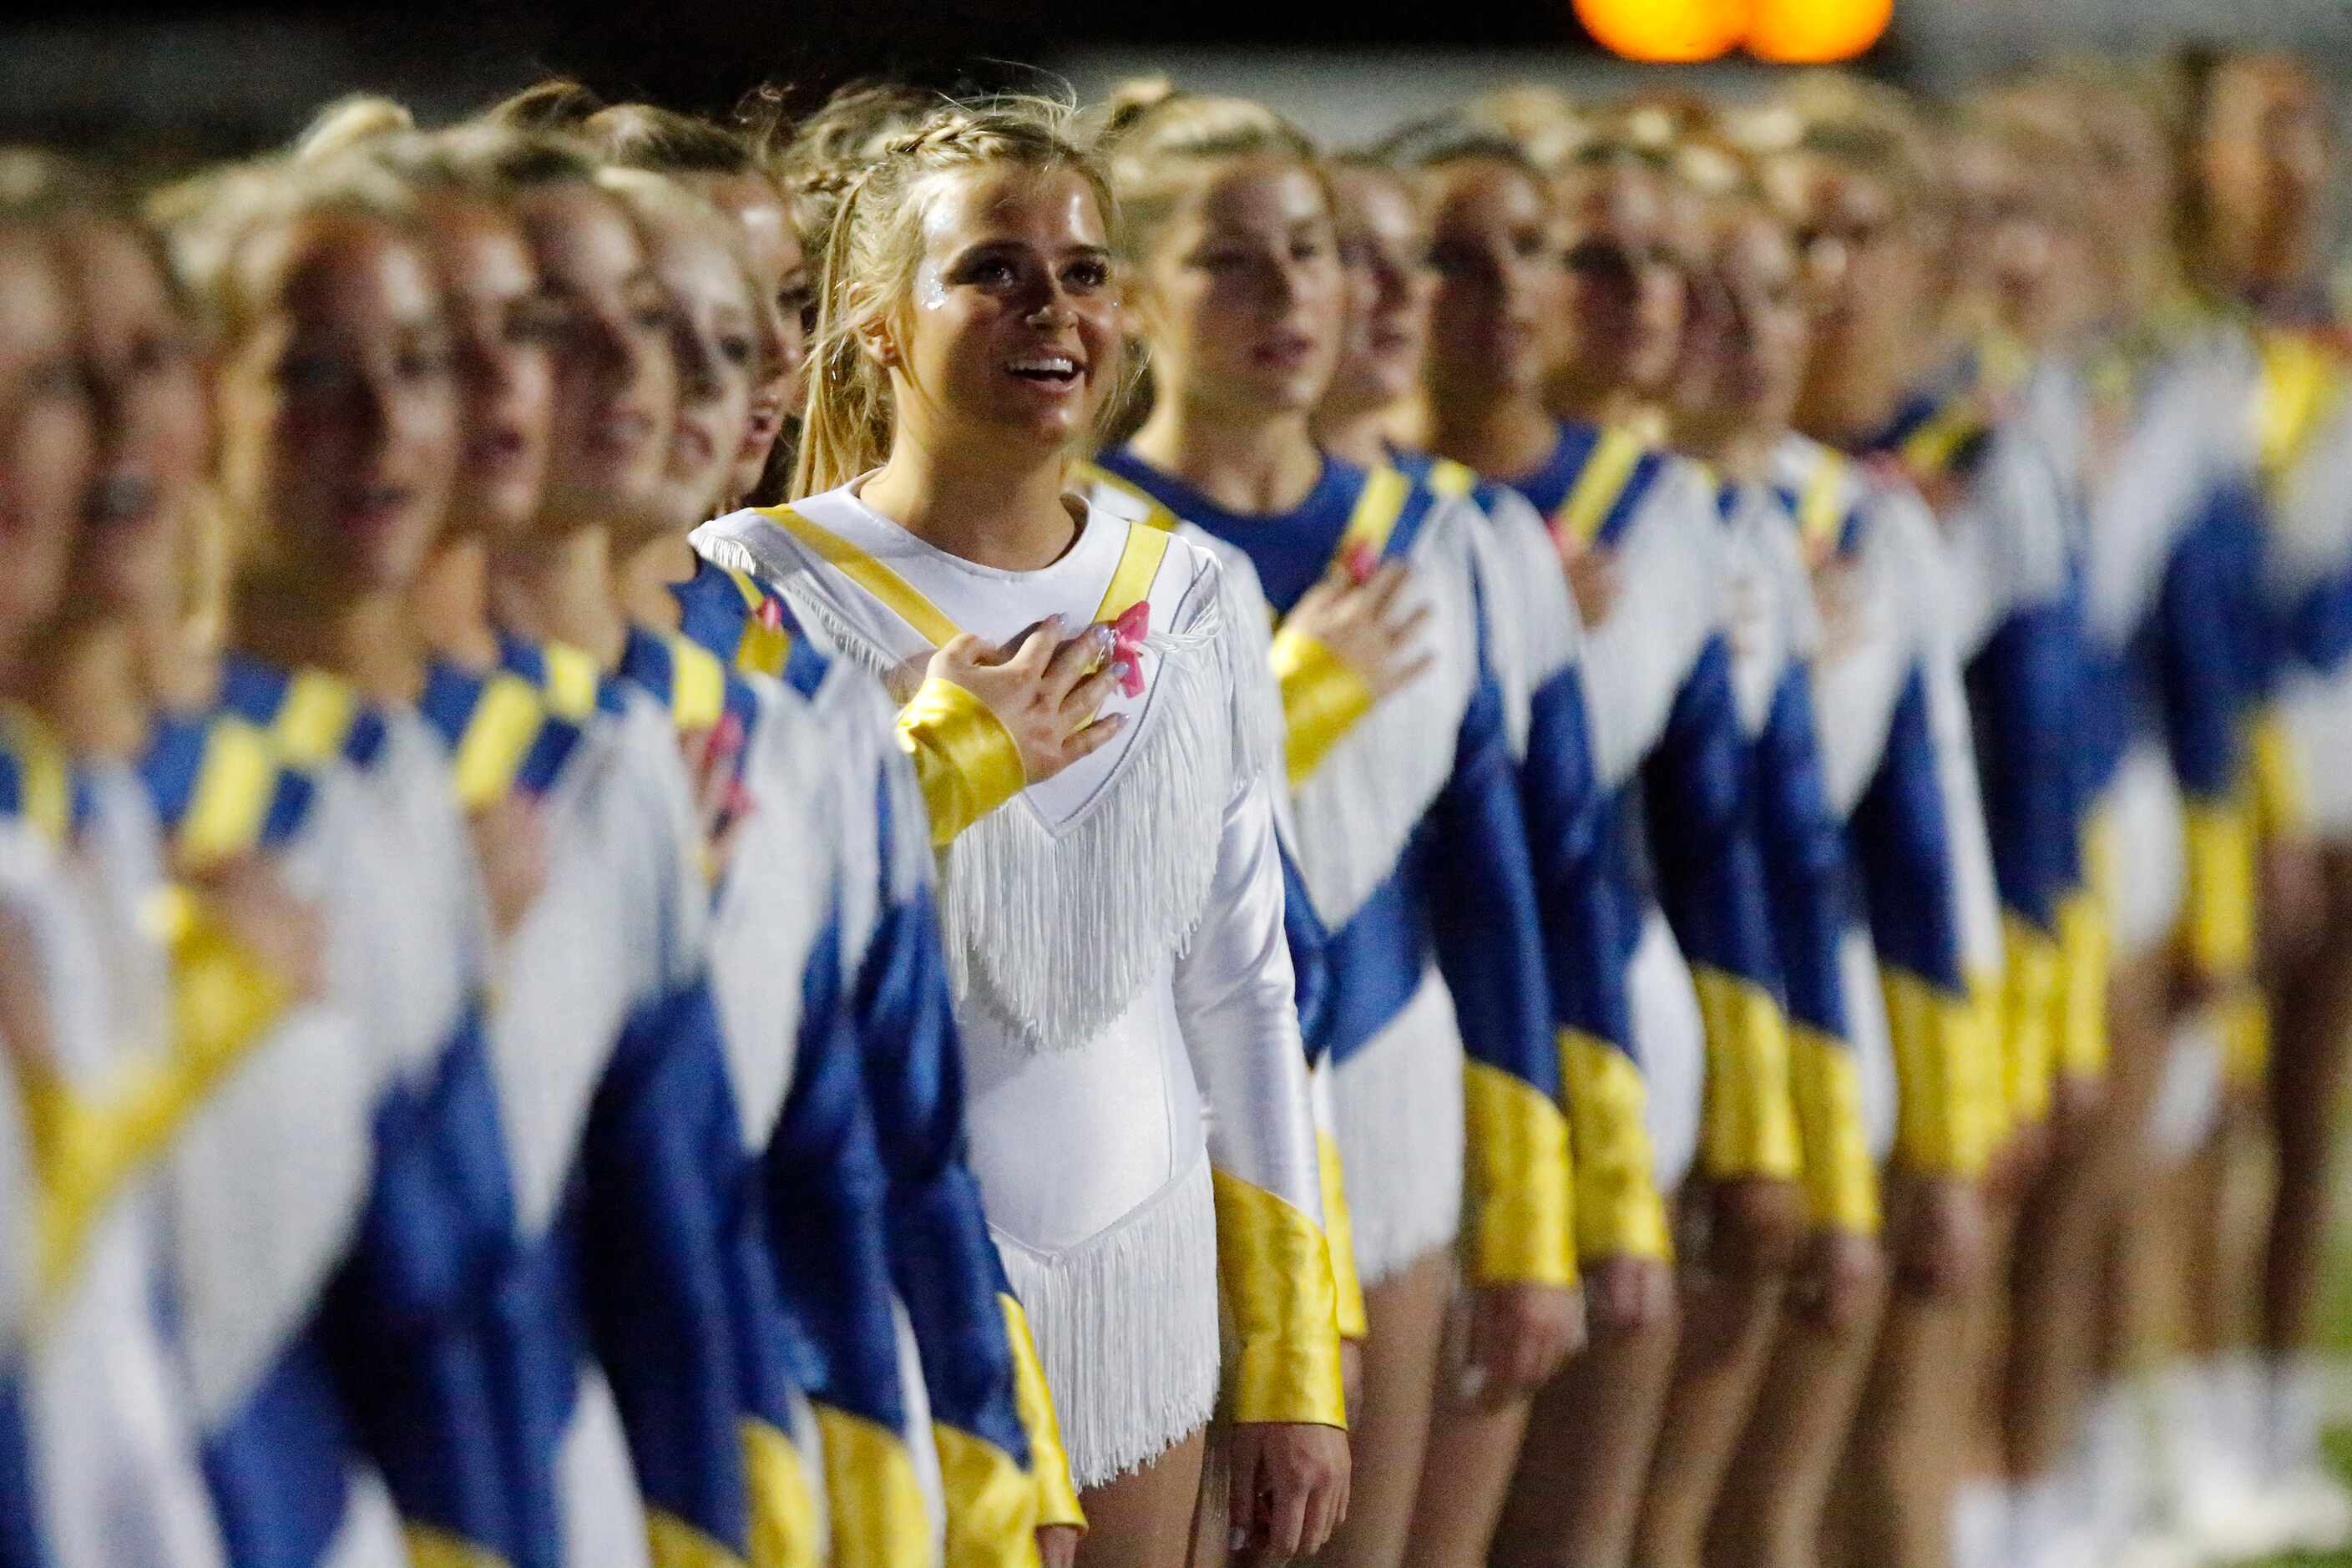 Chloe Walsh with the Highland Park High School Belles drill team stands at attention during...